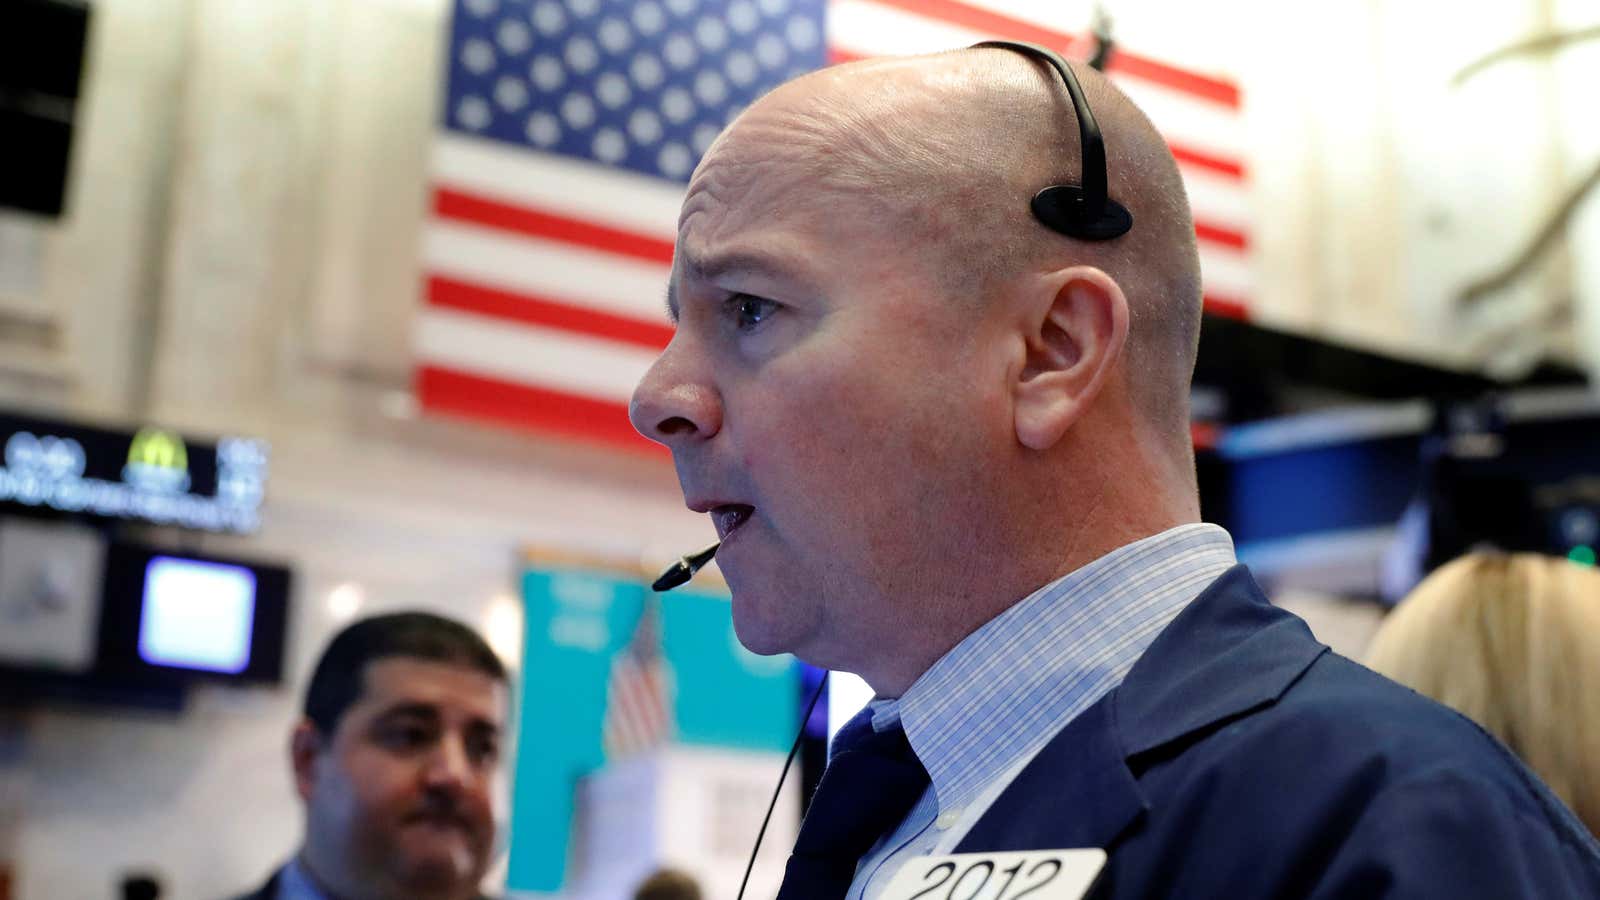 A trader on the floor of the New York Stock Exchange on March 1.